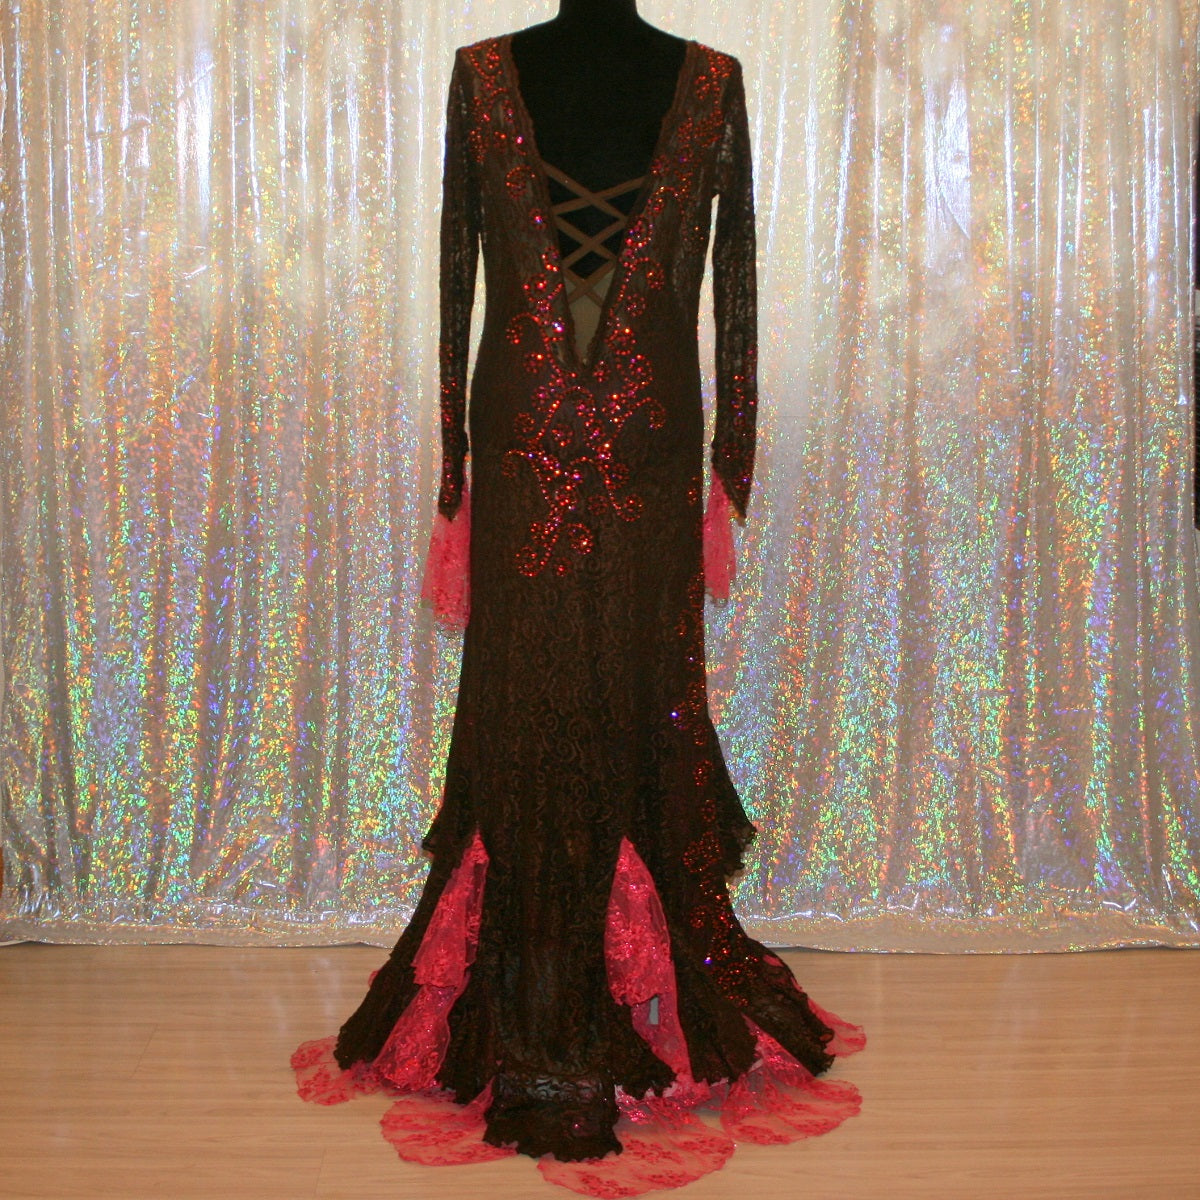 back view of Brown lace tango dress, paso dresss, or fabulous bolero dress or rumba dress created in luxurious chocolate brown stretch lace with accent flounces of a deep pink glitter lace, embellished with Swarovski rhinestone detail work in Indian pink, mocha,copper & fuschia.